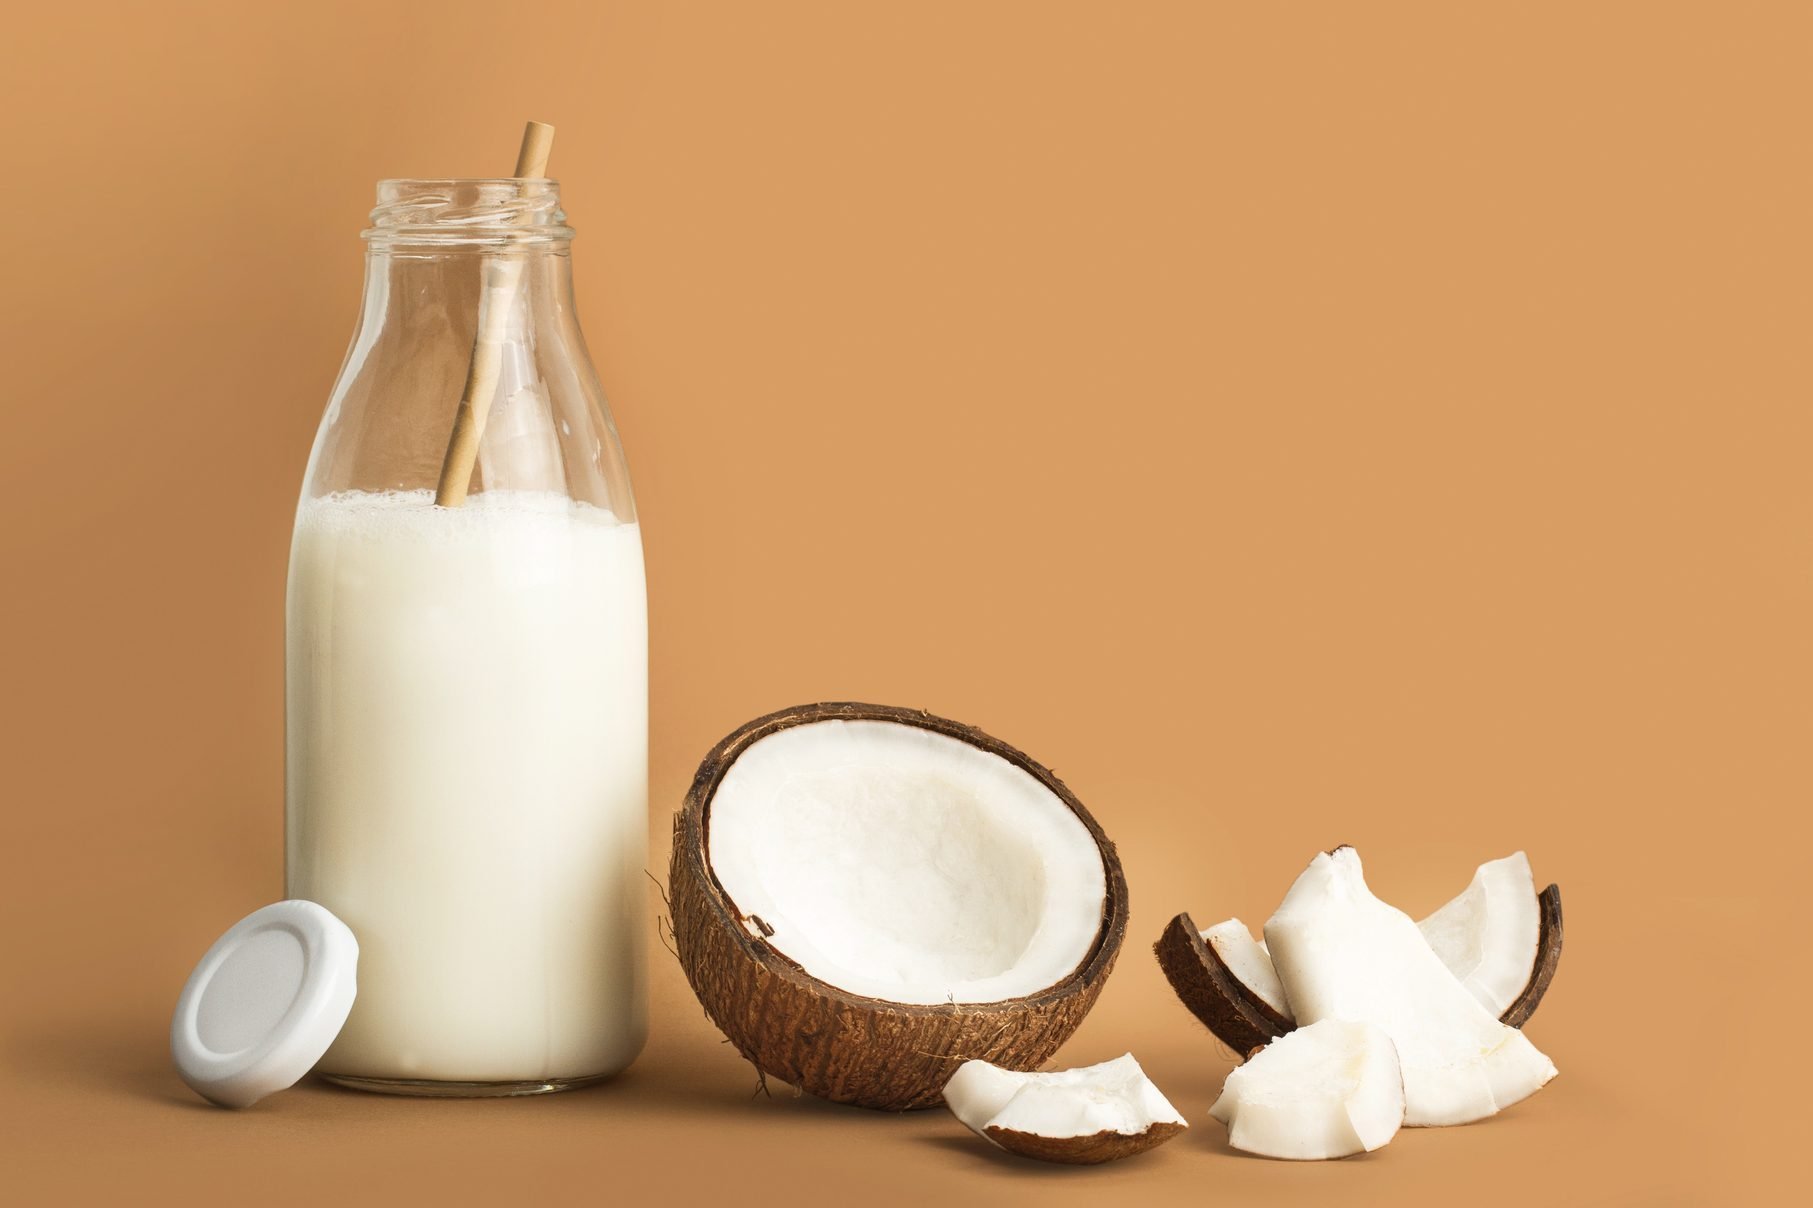 Is Coconut Milk Good for You? Here's What Nutritionists Say